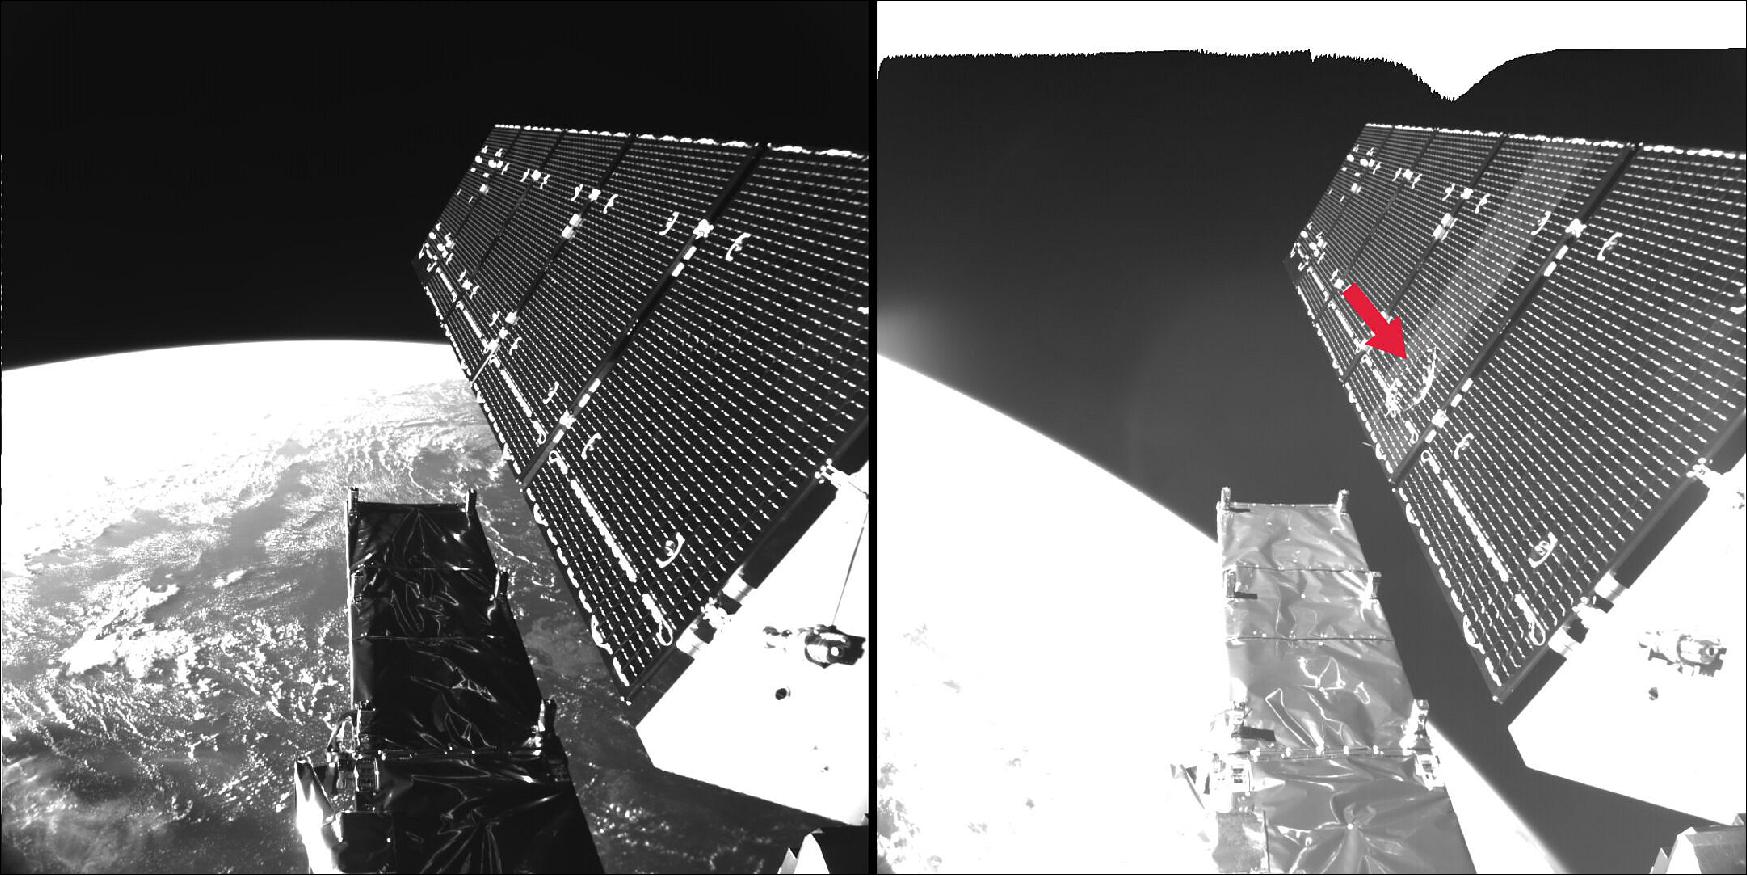 Figure 2: The picture shows Sentinel-1A’s solar array before and after the impact of a millimeter-size particle on the second panel. The damaged area has a diameter of about 40 cm, which is consistent on this structure with the impact of a fragment of less than 5 mm in size. The impact incident was discovered in 2016 (image credit: ESA)